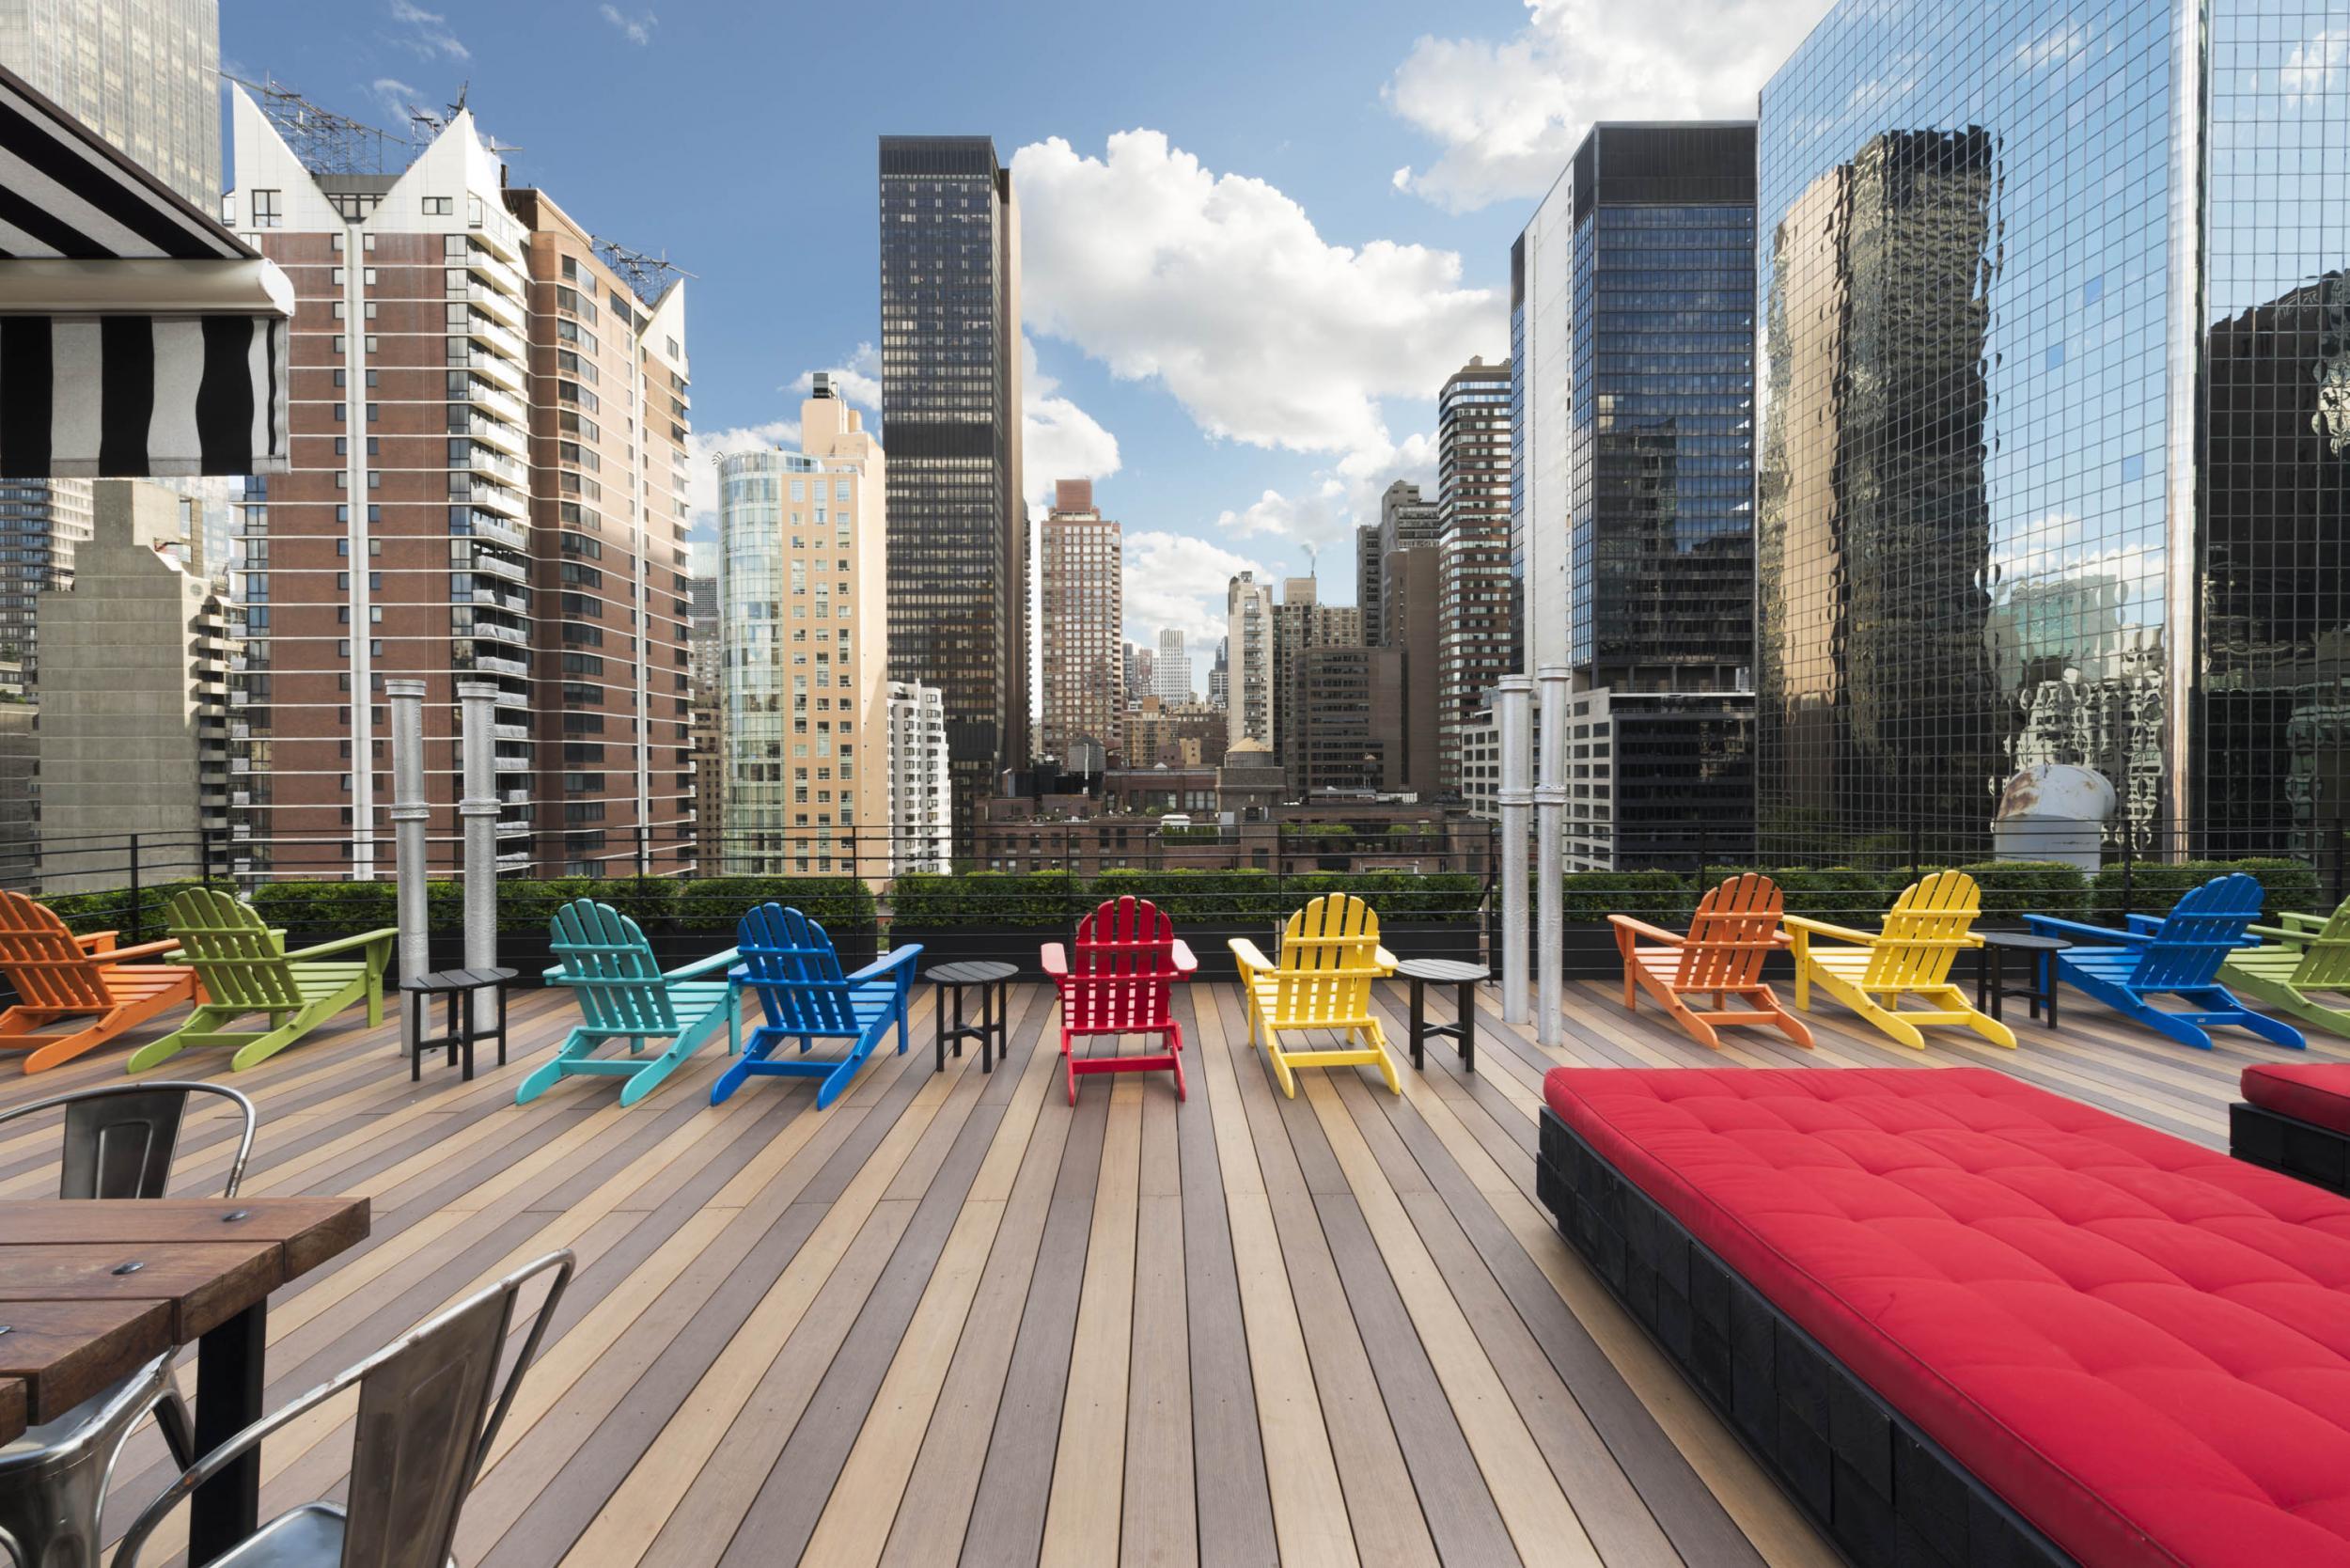 10 of the best New York rooftop bars The Independent The Independent